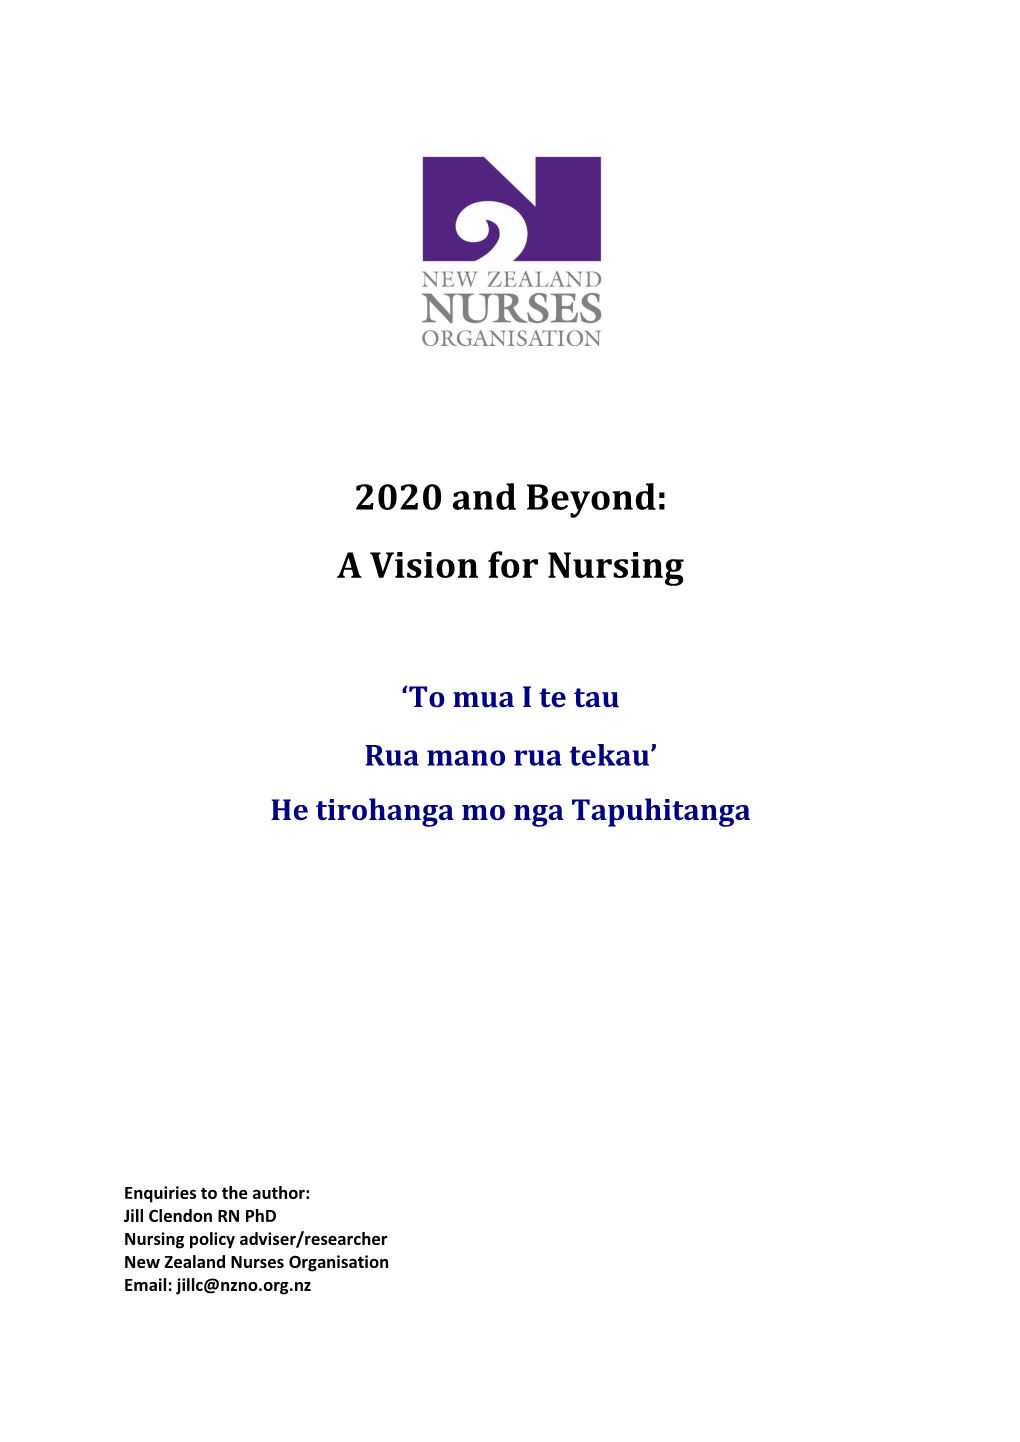 2020 and Beyond: a Vision for Nursing